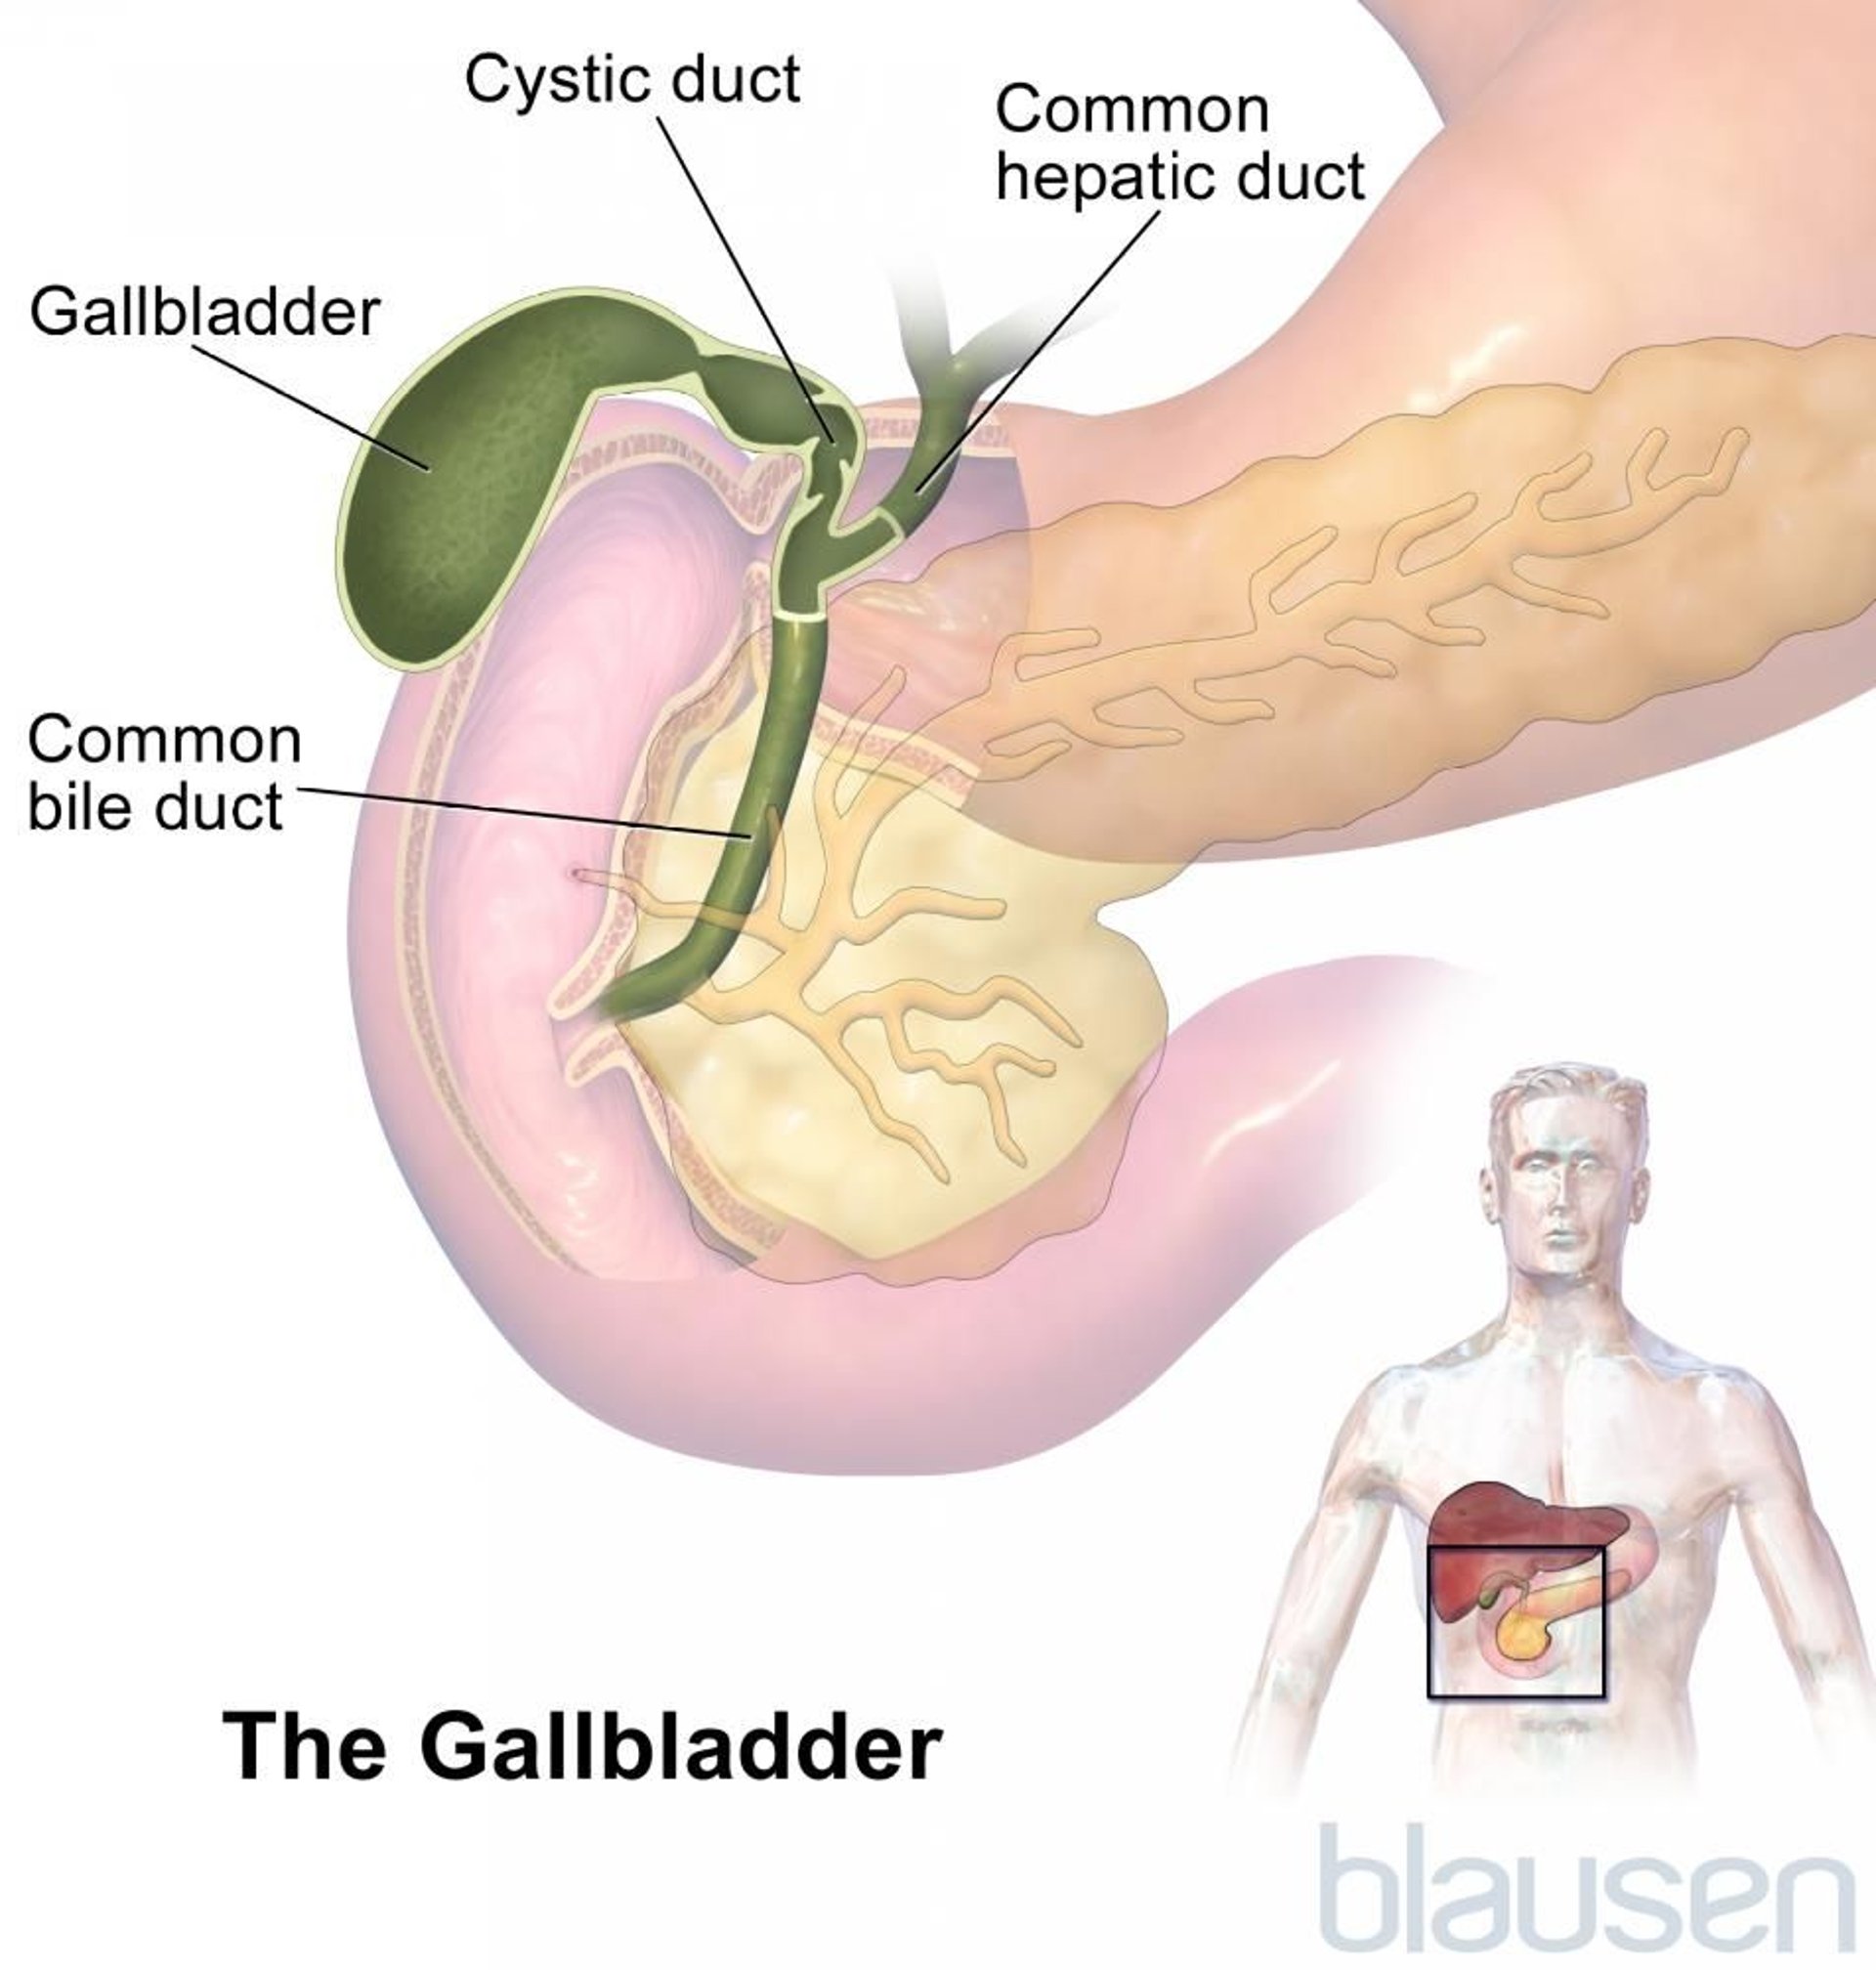 The Gallbladder and Bile Ducts